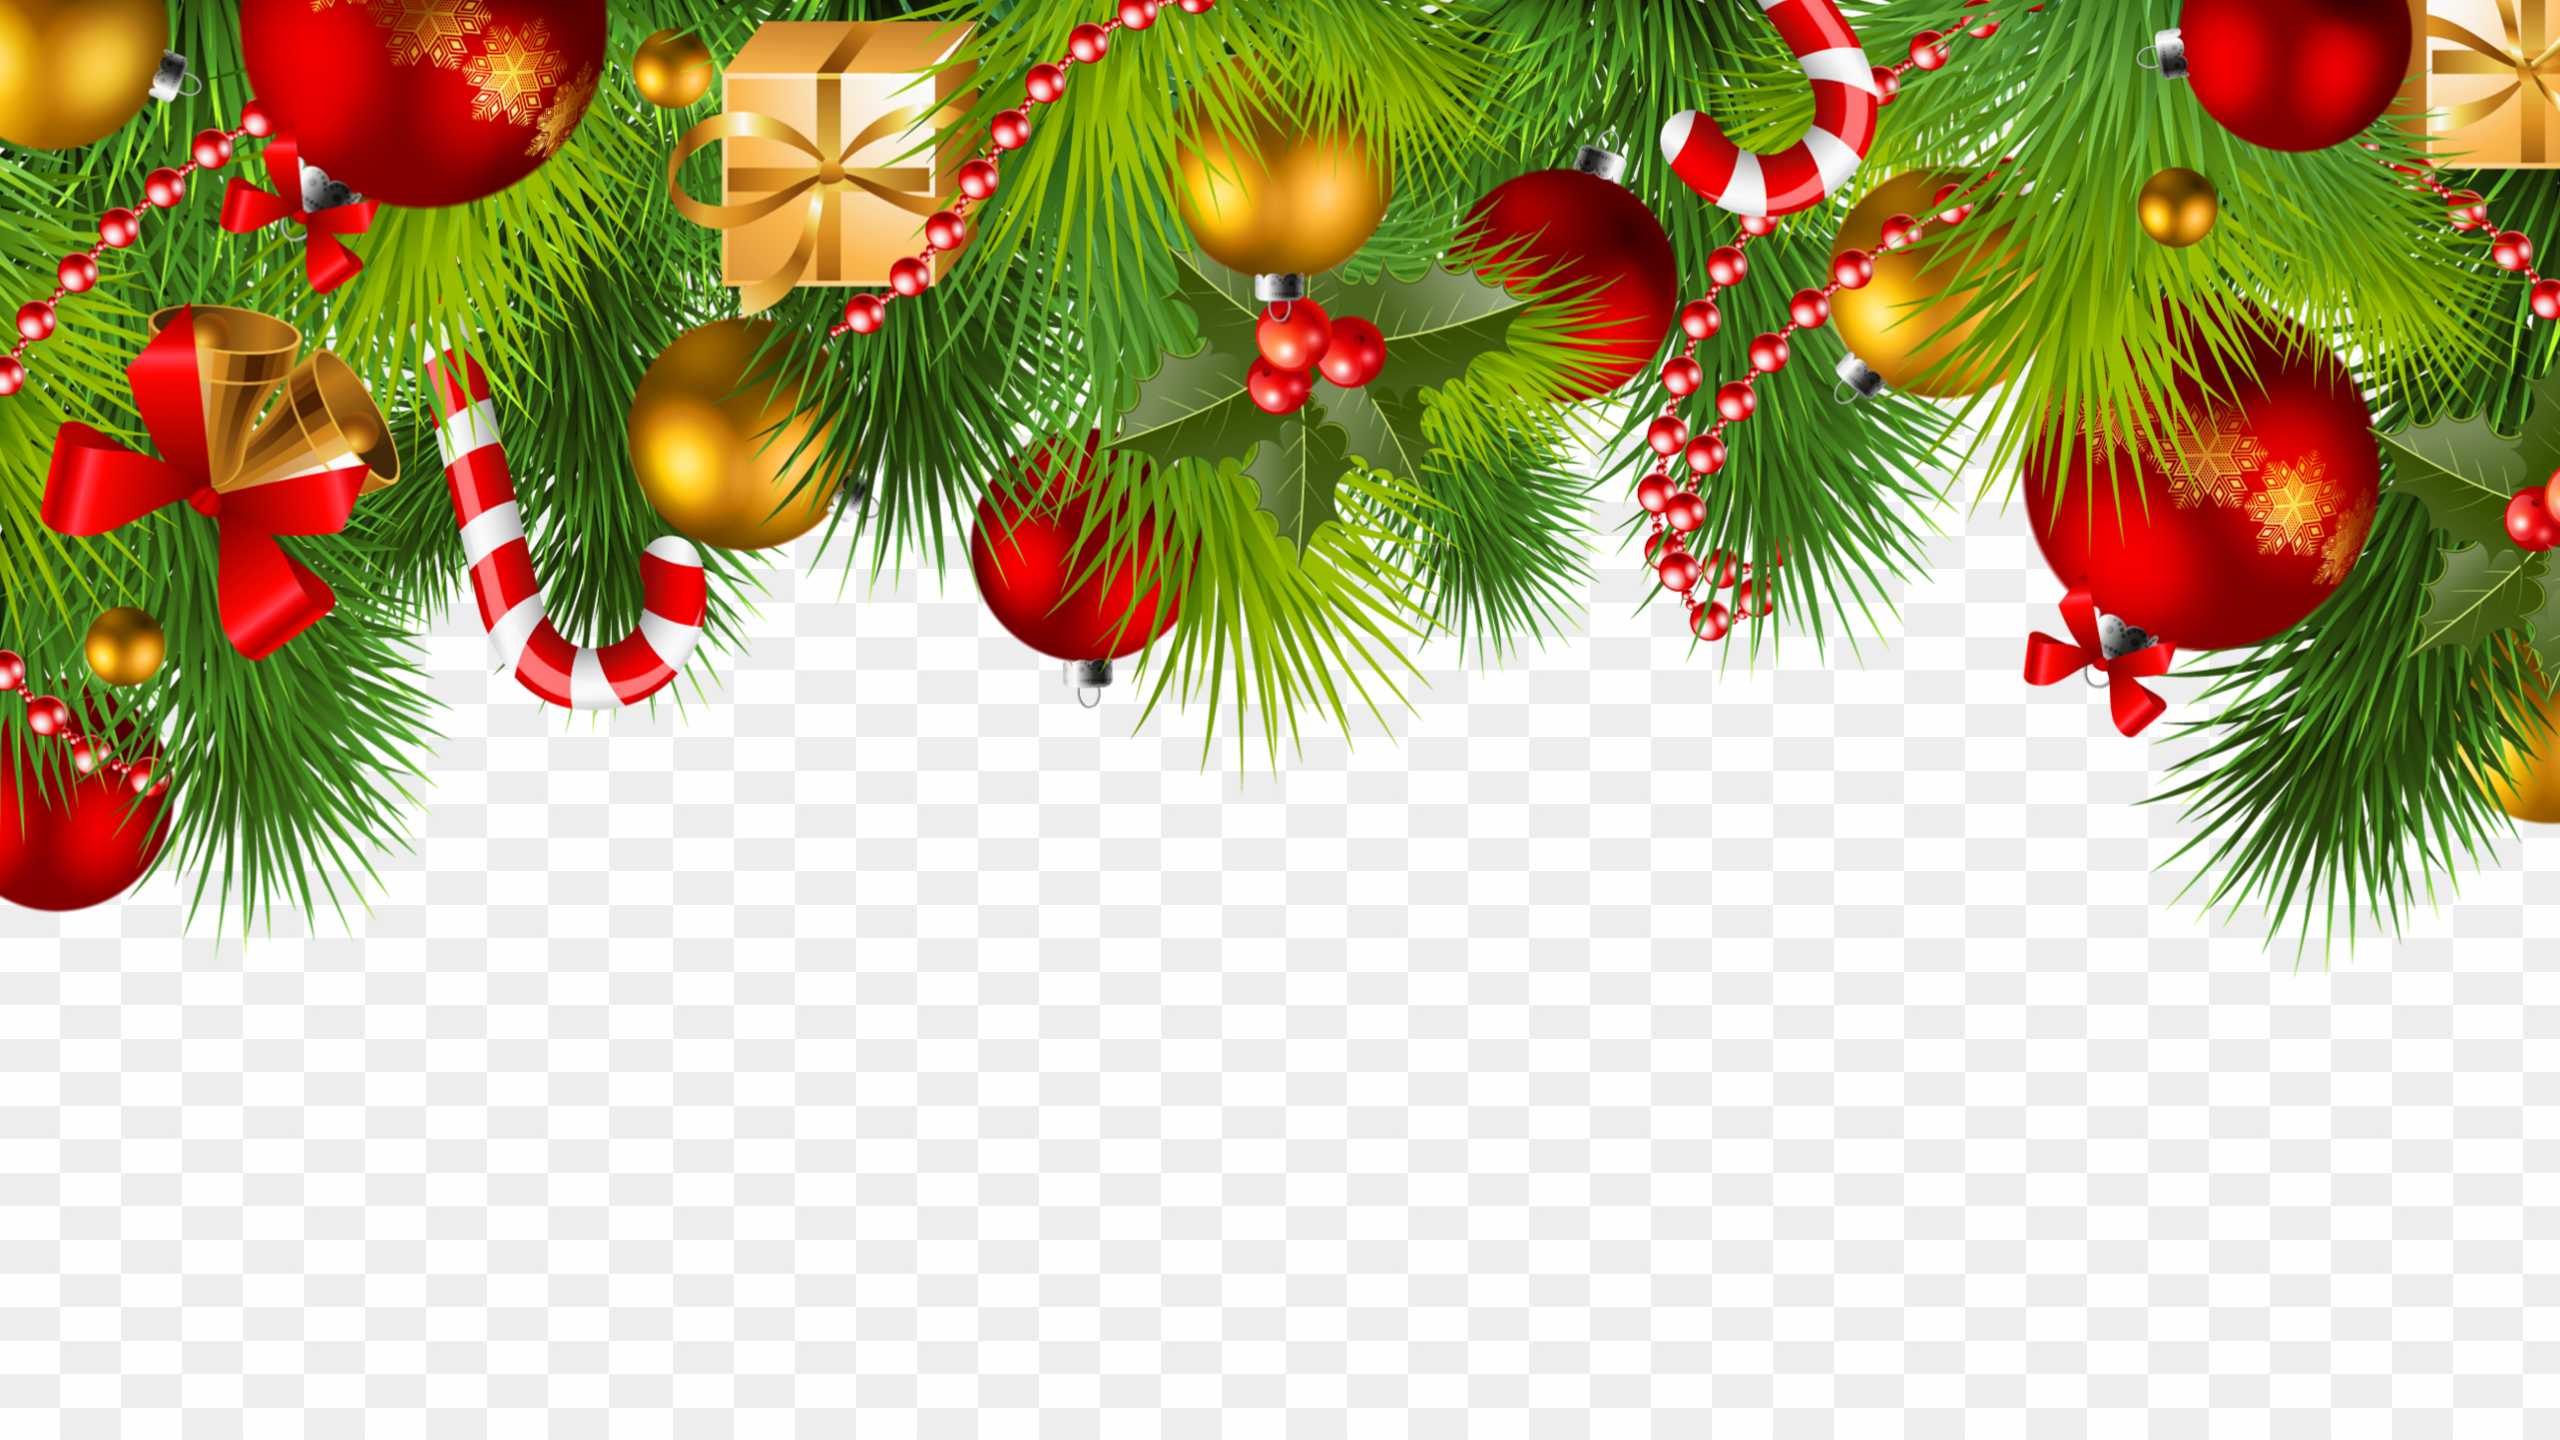 Happy Christmas PNG Images - transparent background PNG cliparts free  download | AllPNGFree